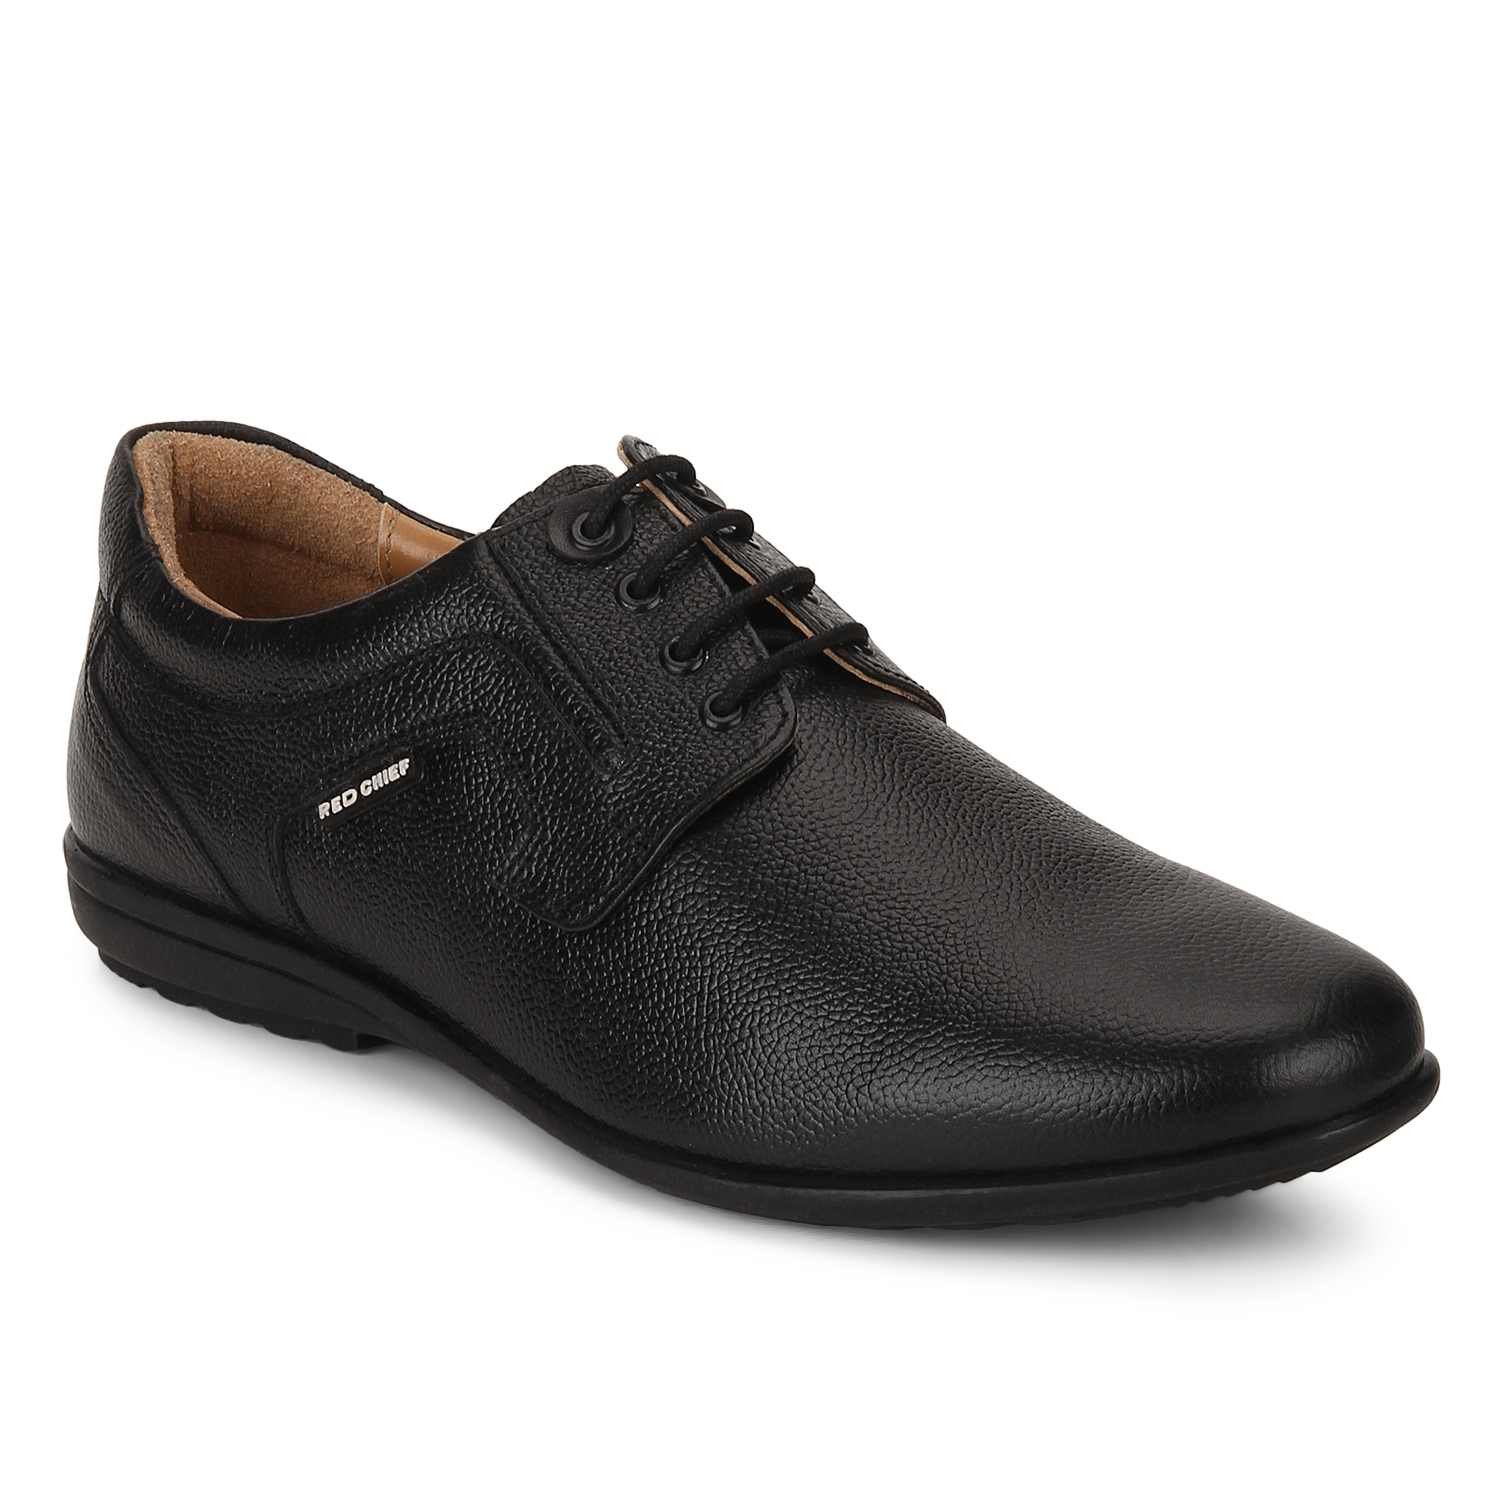 RED CHIEF | Black Derby Shoes